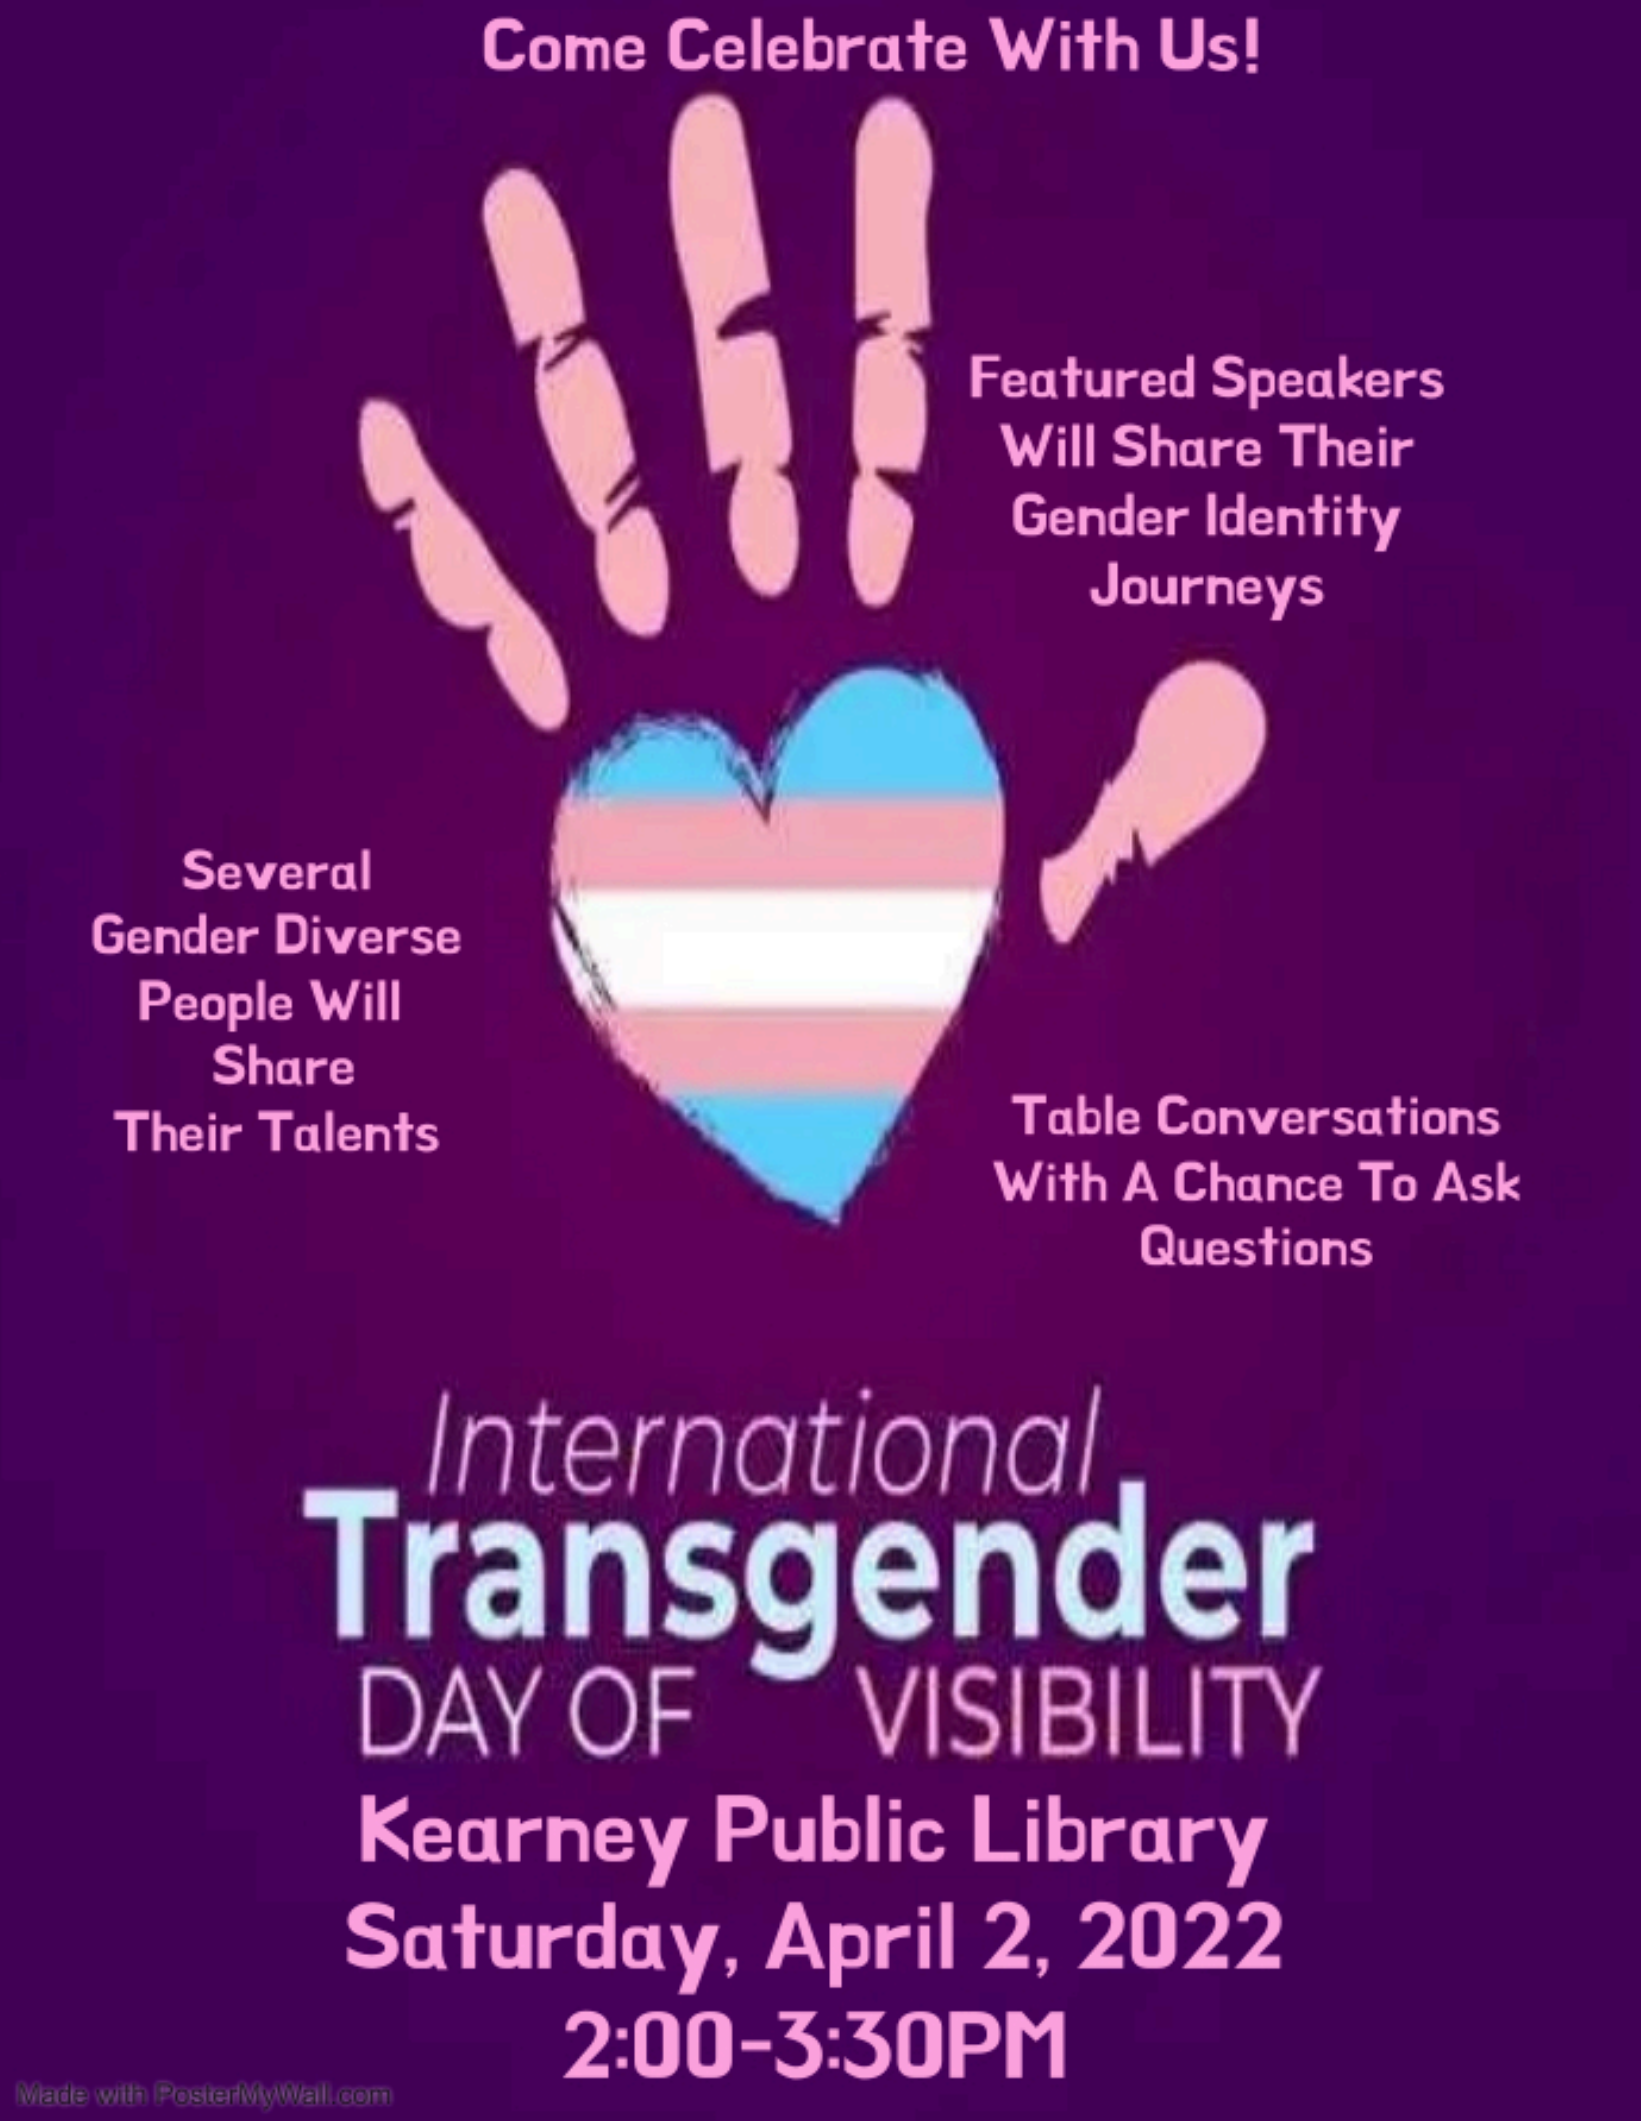 Purple background with a pink handprint. The palm is shaped like a heart and in the colors of the trans flag. Text: Come celebrate with us! Featured speakers will share their gender identity journeys. Several gender diverse people will share their talents. Table conversations with a chance to ask questions. International Transgender Day of Visibility. Kearney Public Library. Saturday, April 2, 2022. 2-3:30pm.